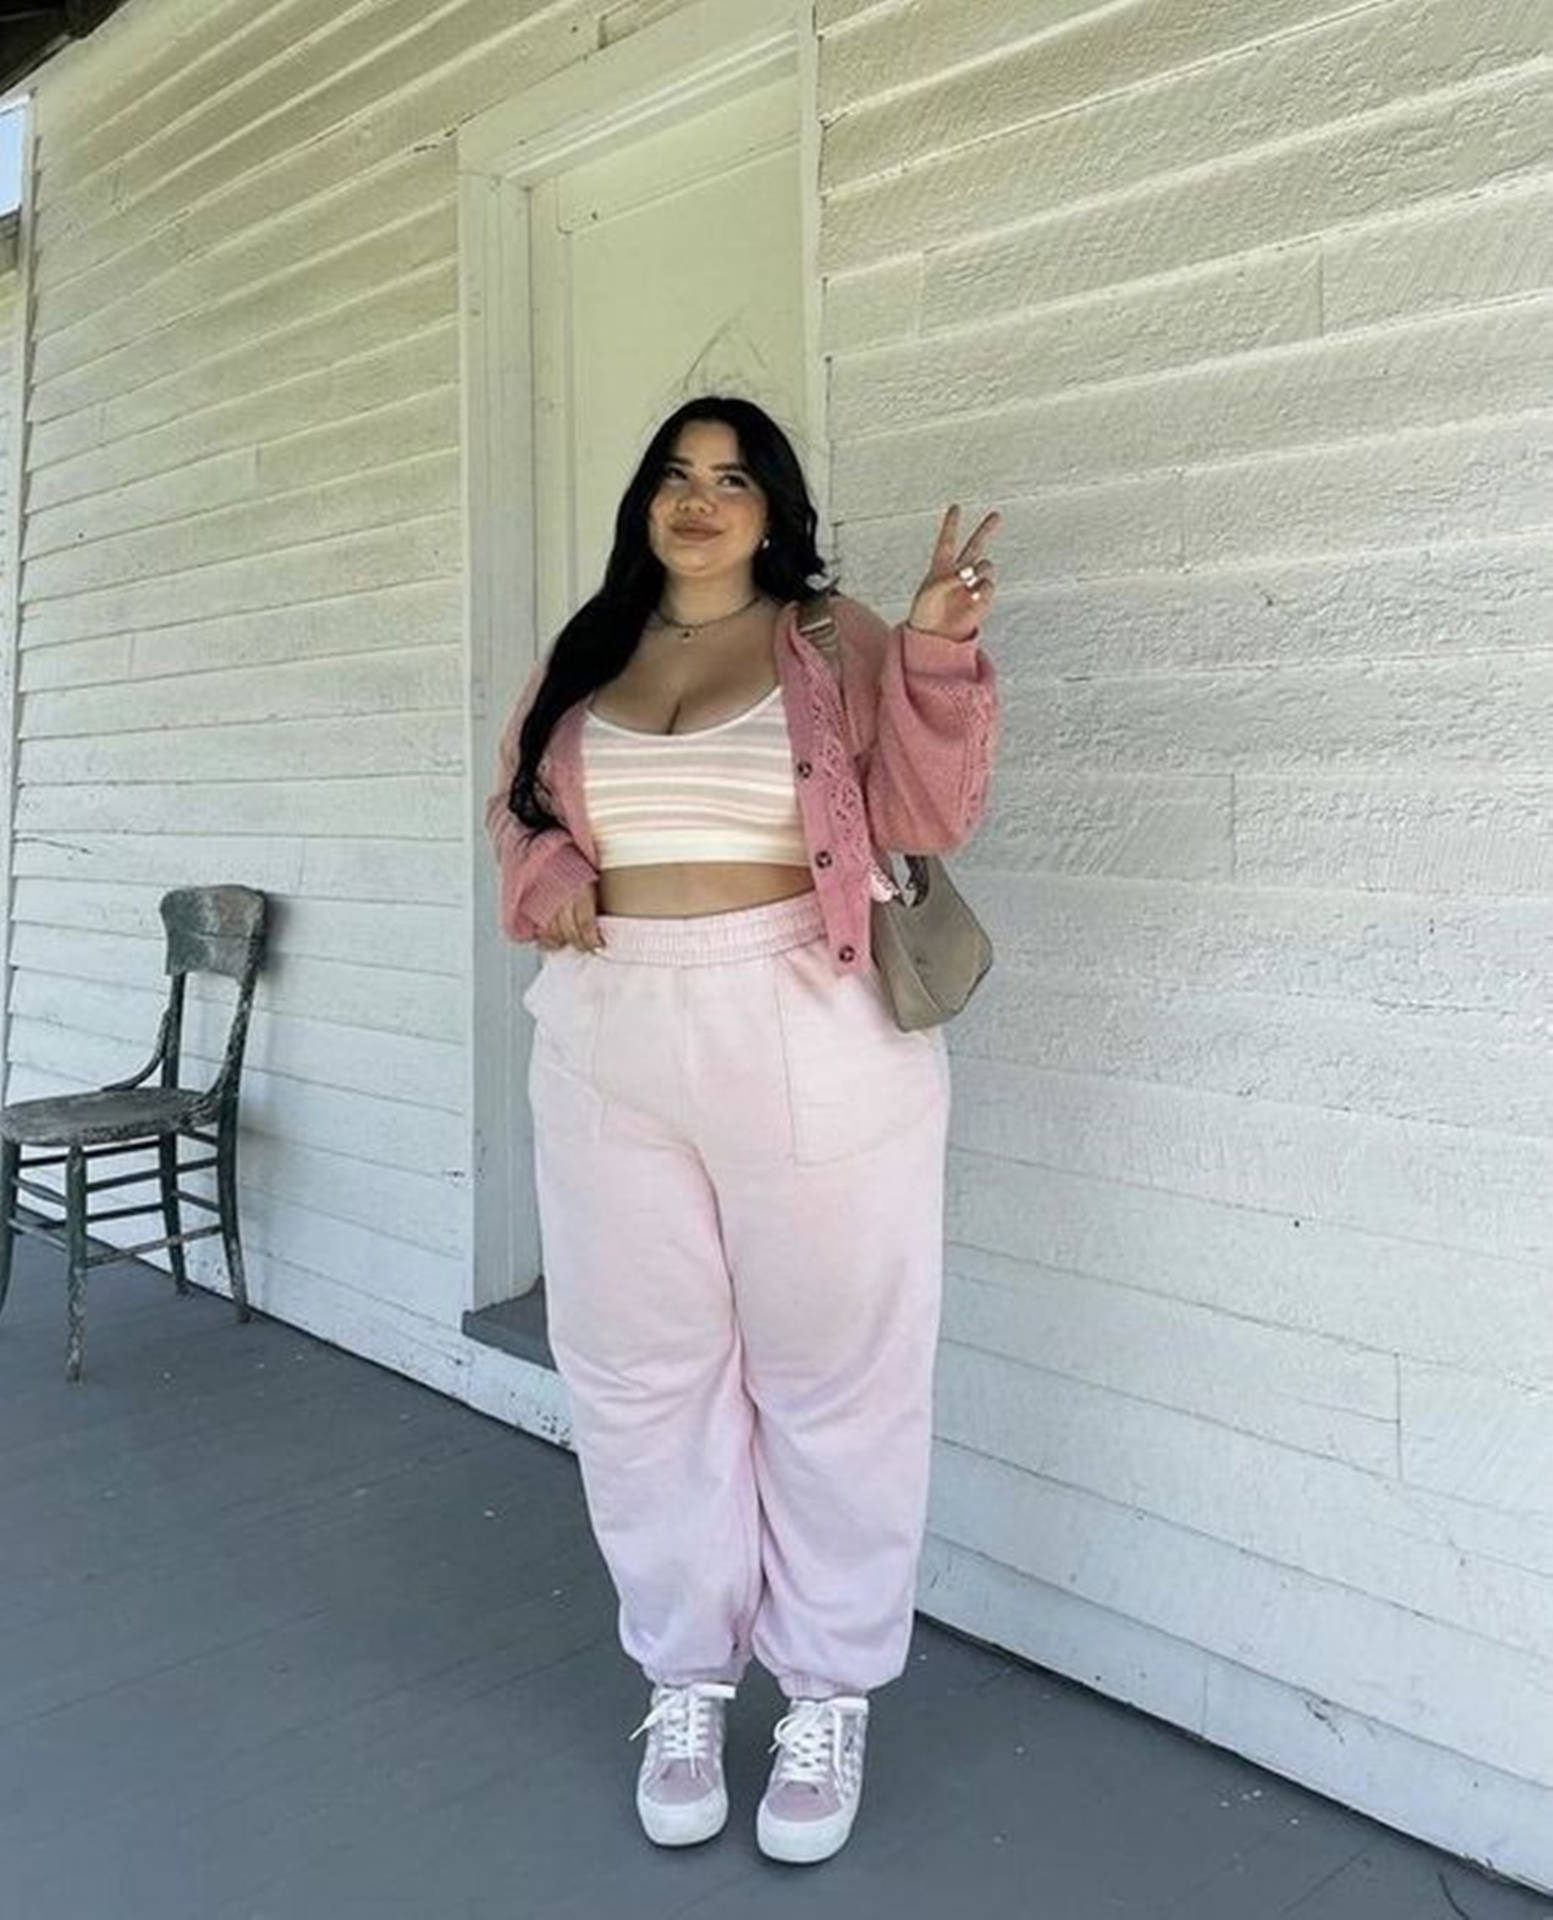 Download Chubby Teen Pink Outfit Wallpaper | Wallpapers.com